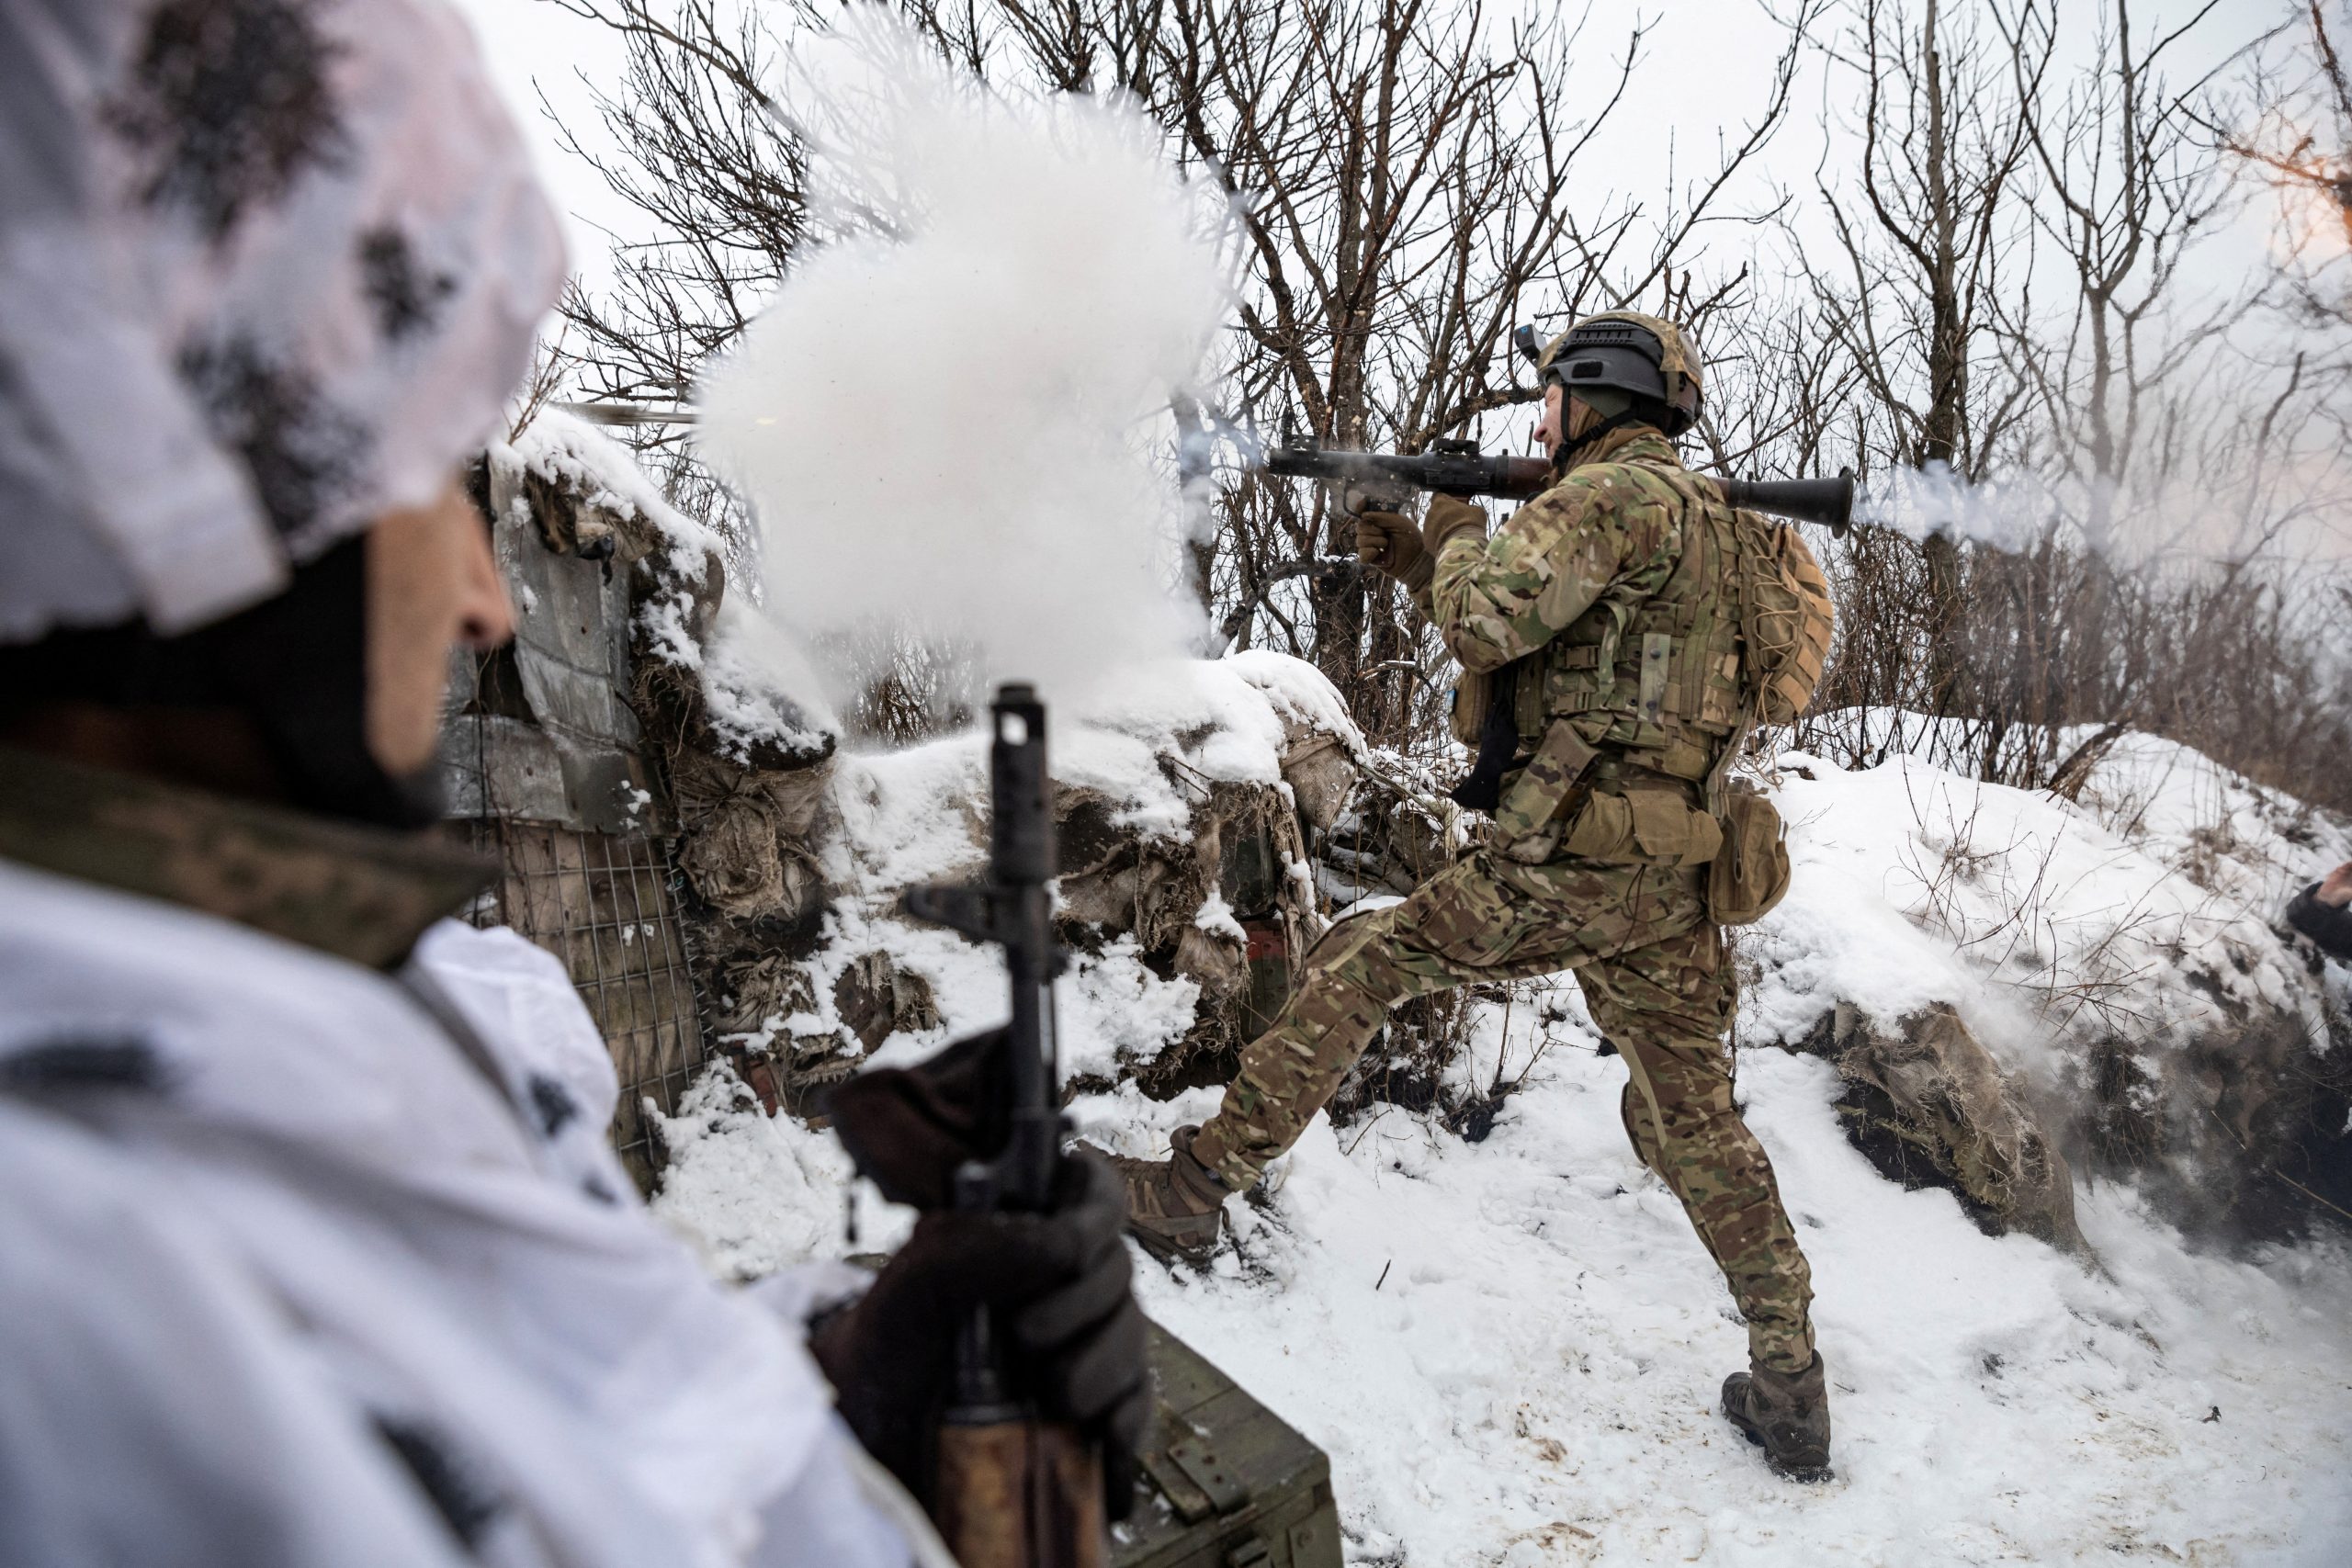 Bohdan, 'Fritz', the unit commander's deputy in the 79th Air Assault Brigade, fires a rocket-propelled grenade (RPG) towards Russian positions on a front line near the town of Marinka, in the middle of the Russia attack on Ukraine, Donetsk region, Ukraine, February 14, 2023. REUTERS/Marko Djurica